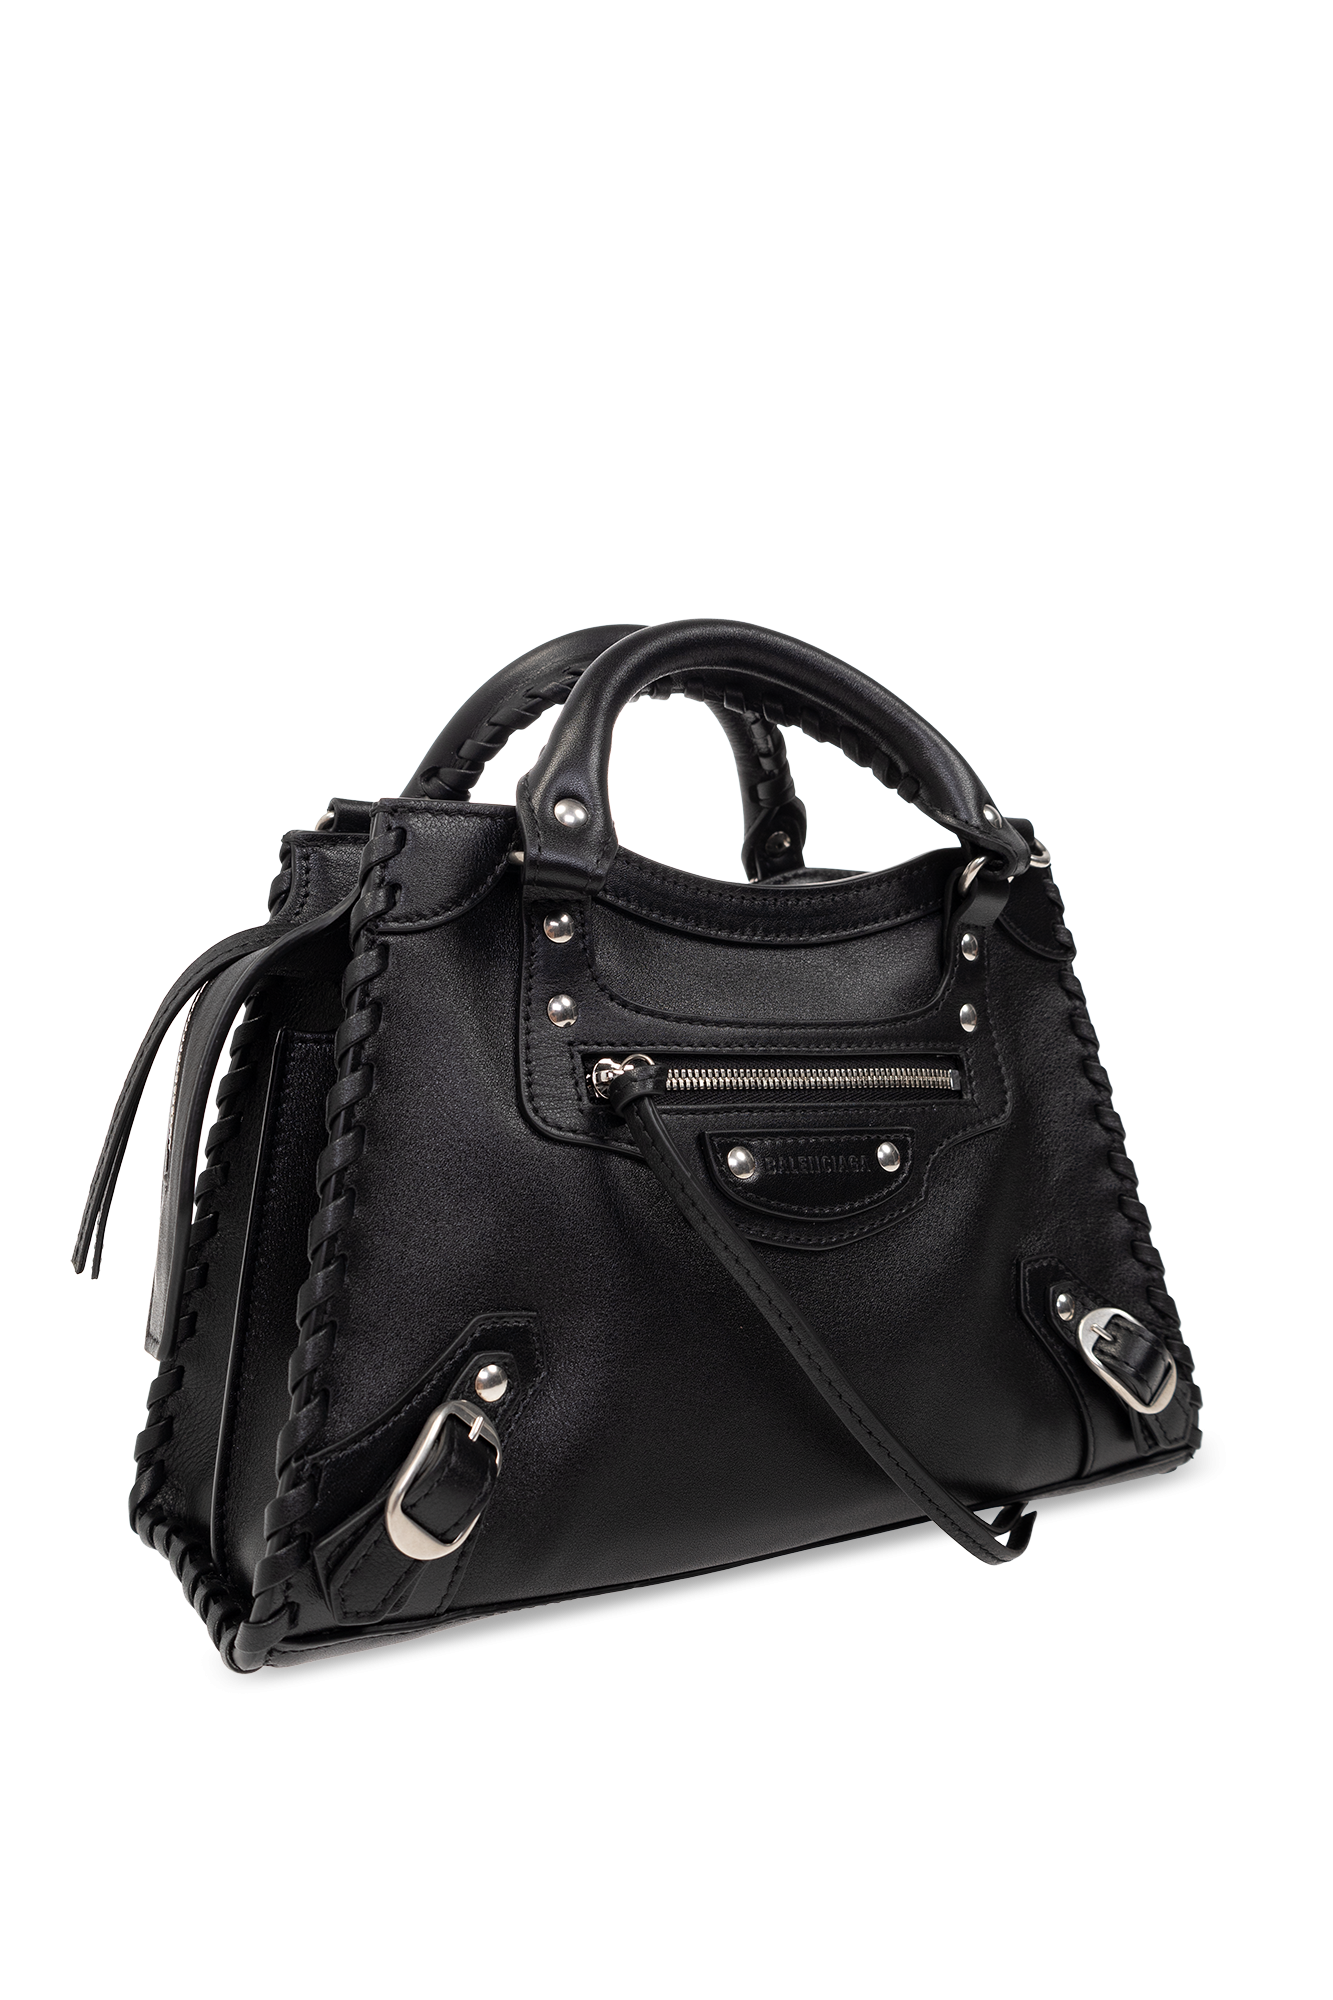 BALENCIAGA: Neo Classic City XS bag in leather with shoulder strap - Black